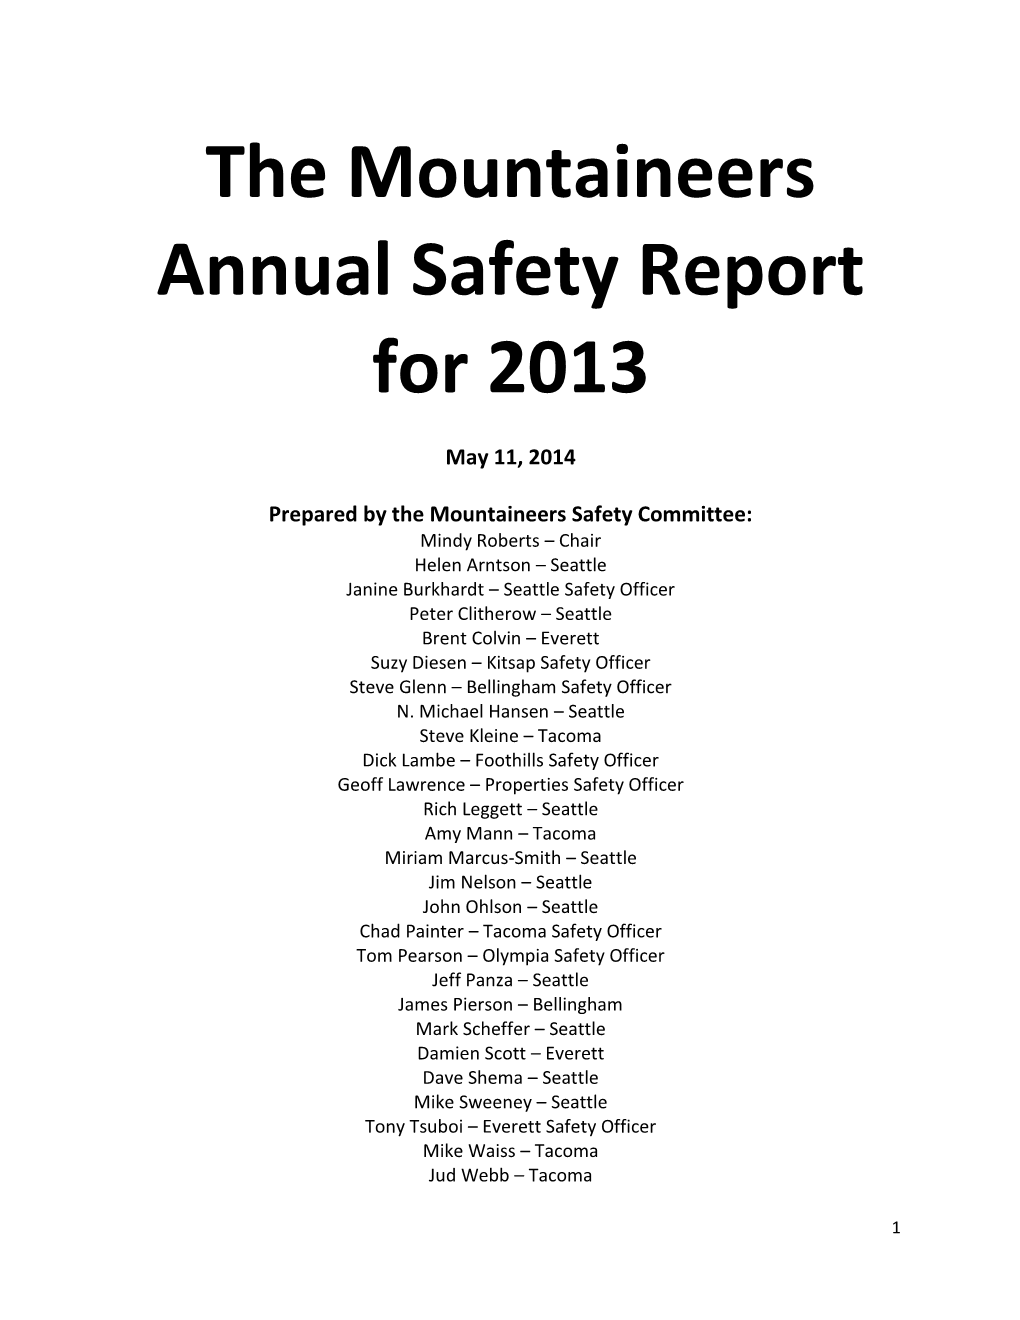 The Mountaineers Annual Safety Report for 2013